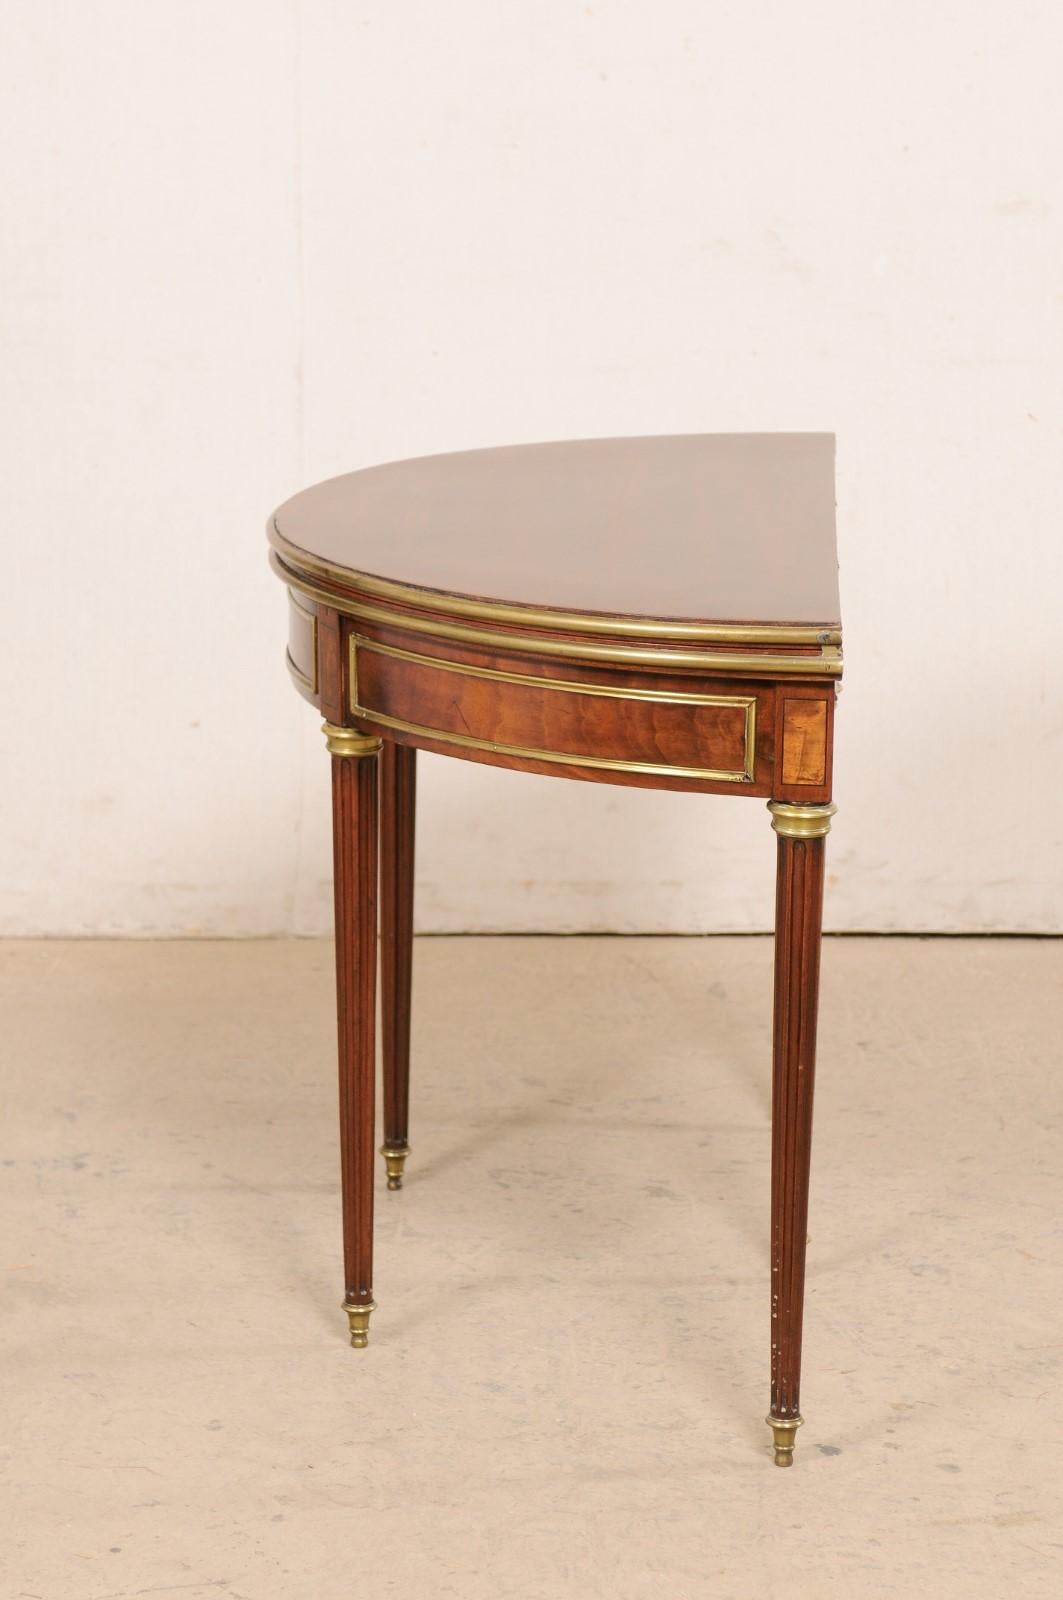  Elegant French Neoclassical Demi-to-round Table W/ Brass Accents, 19th C.  9